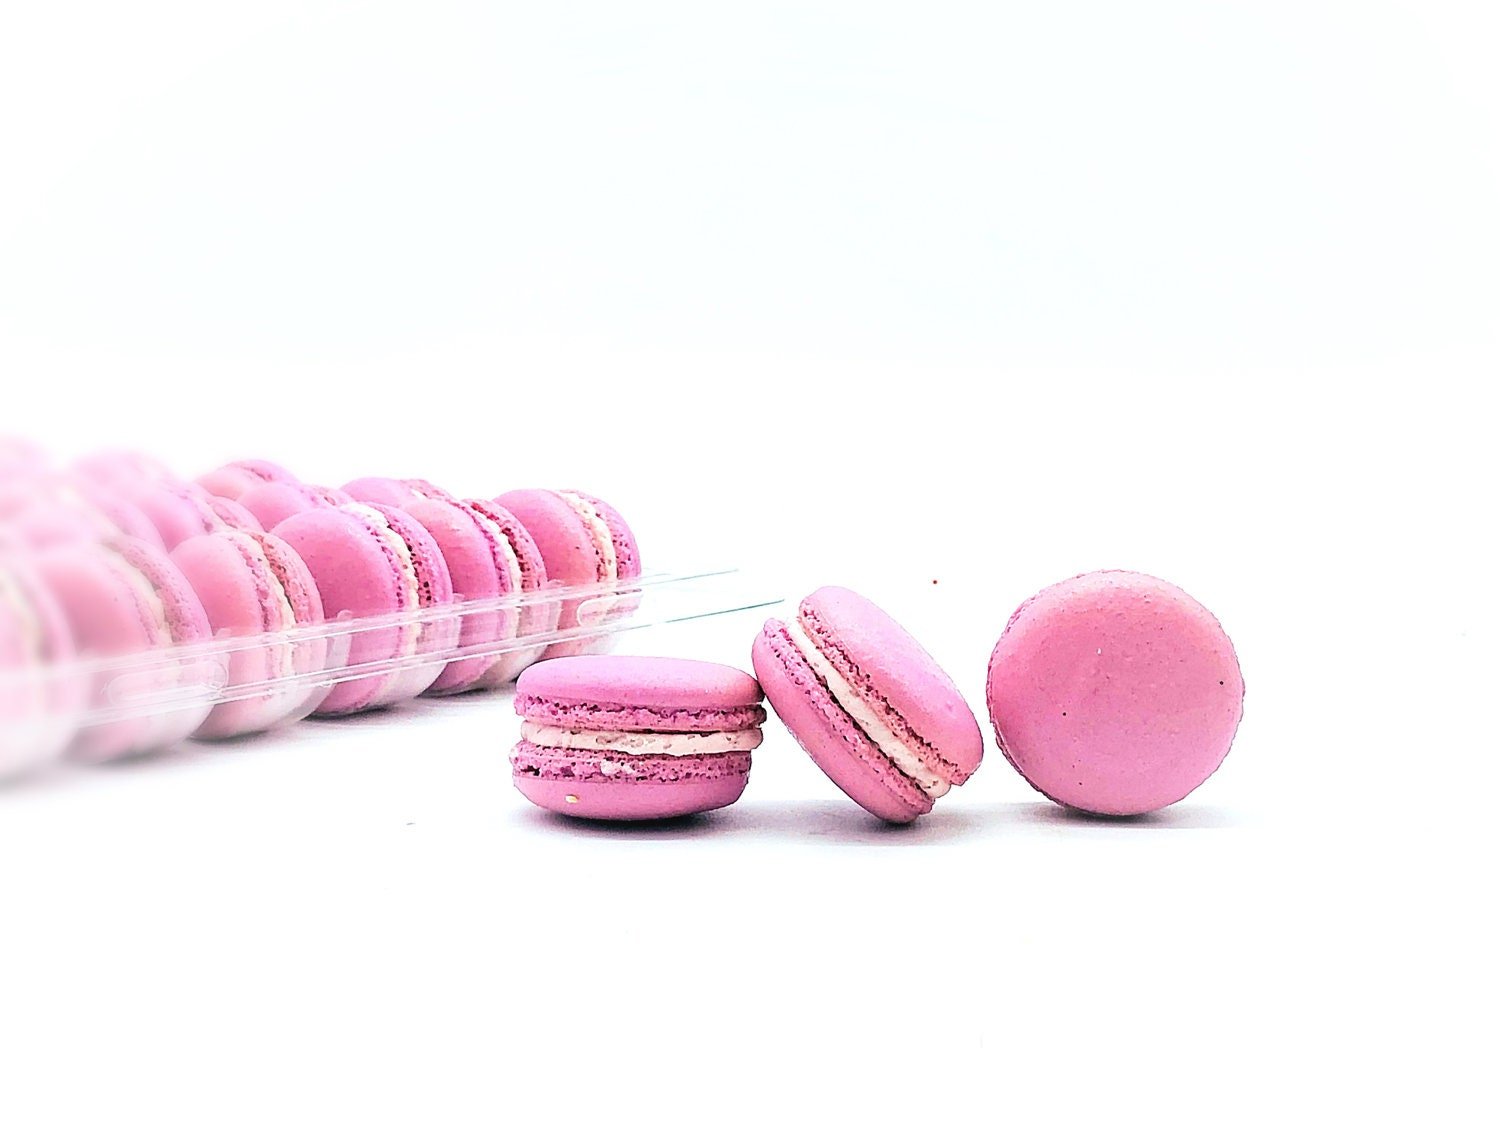 50 Pack Berry Blend French Macaron Value Pack - Macaron Centrale